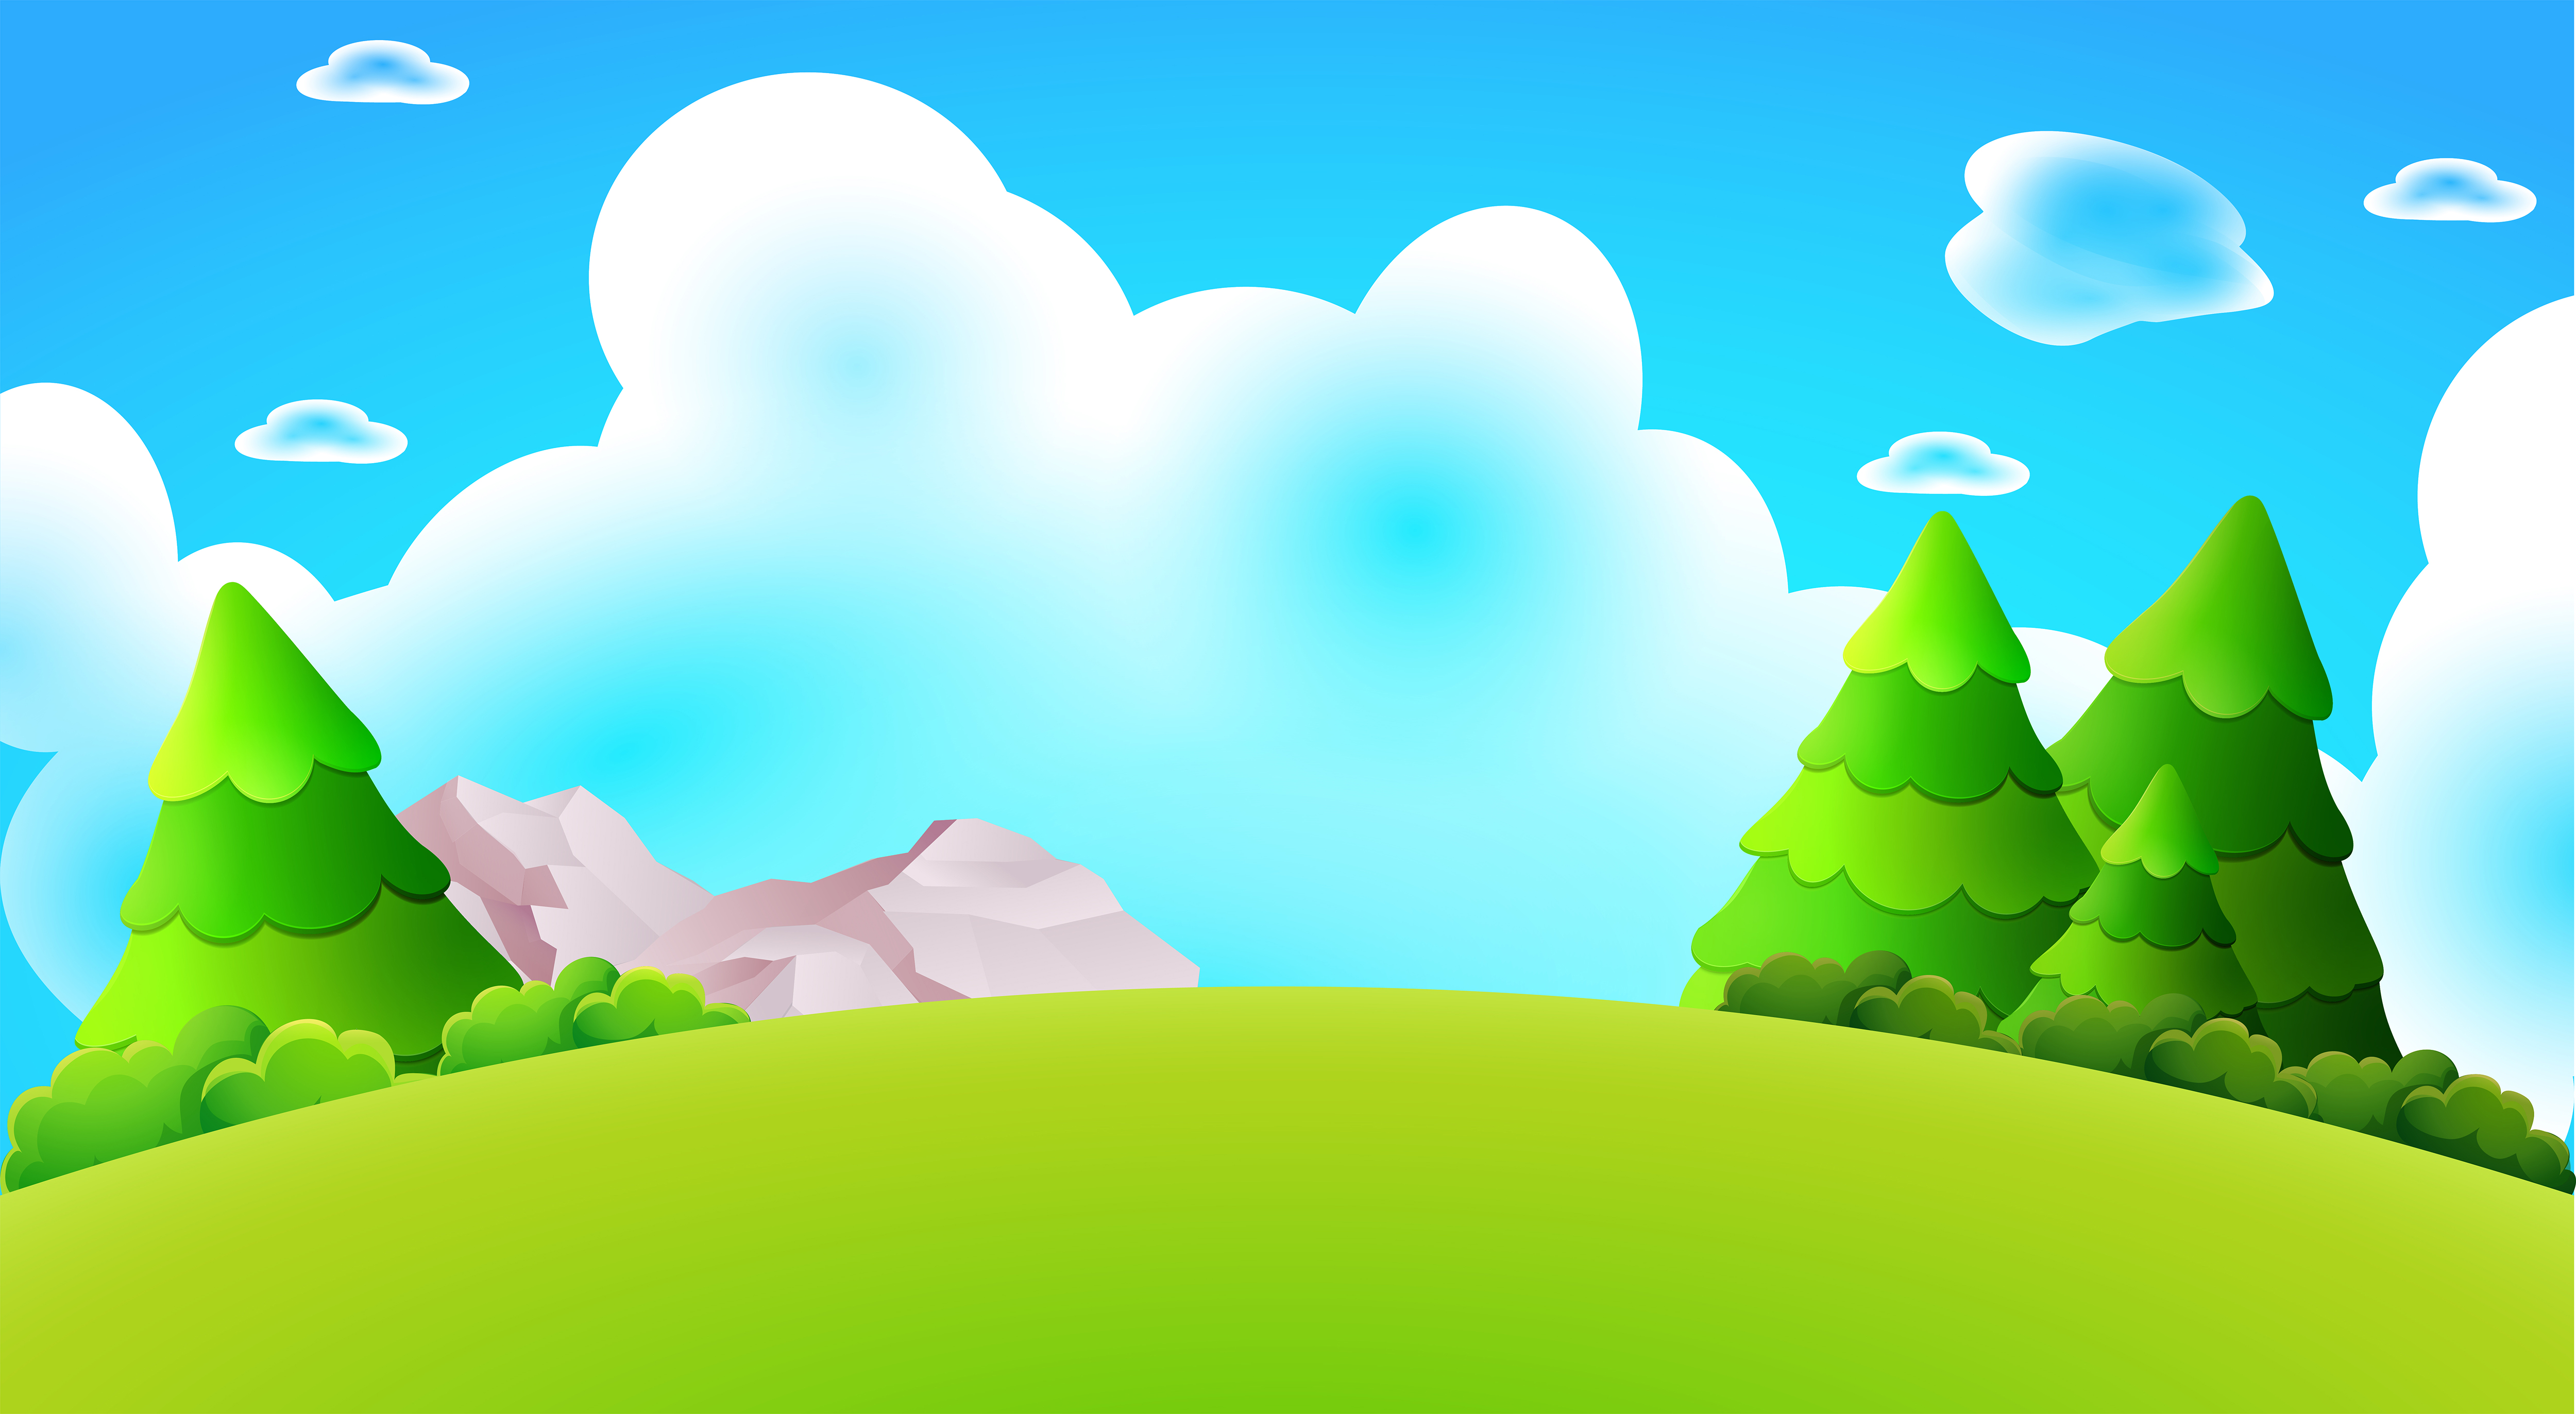 Free download Cartoon forest hill landscape vector nature background